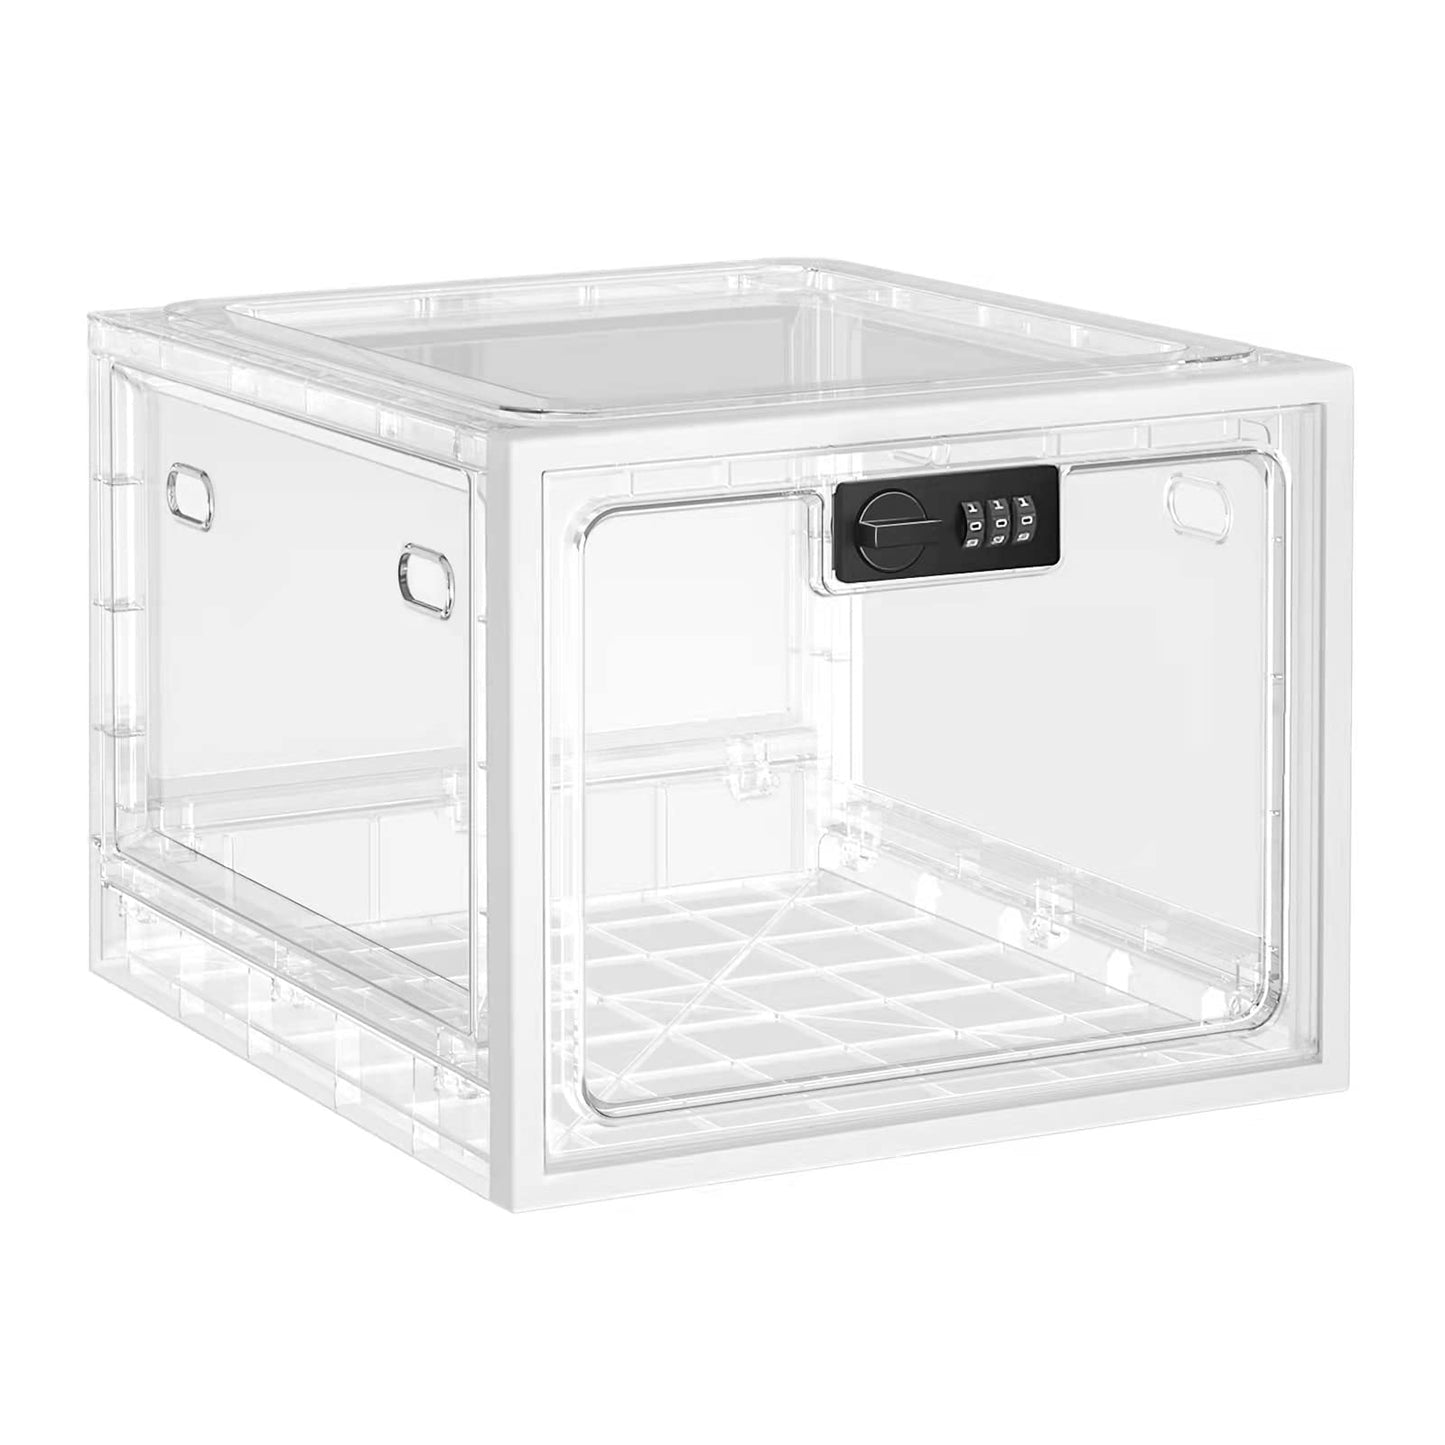 Lockable Storage Box, Closet Storage Box for Clothes, Food, Medication, Phone Safety, Medication Lock Box for Kitchen, Home, Office, Clear 11.9 * 9.3